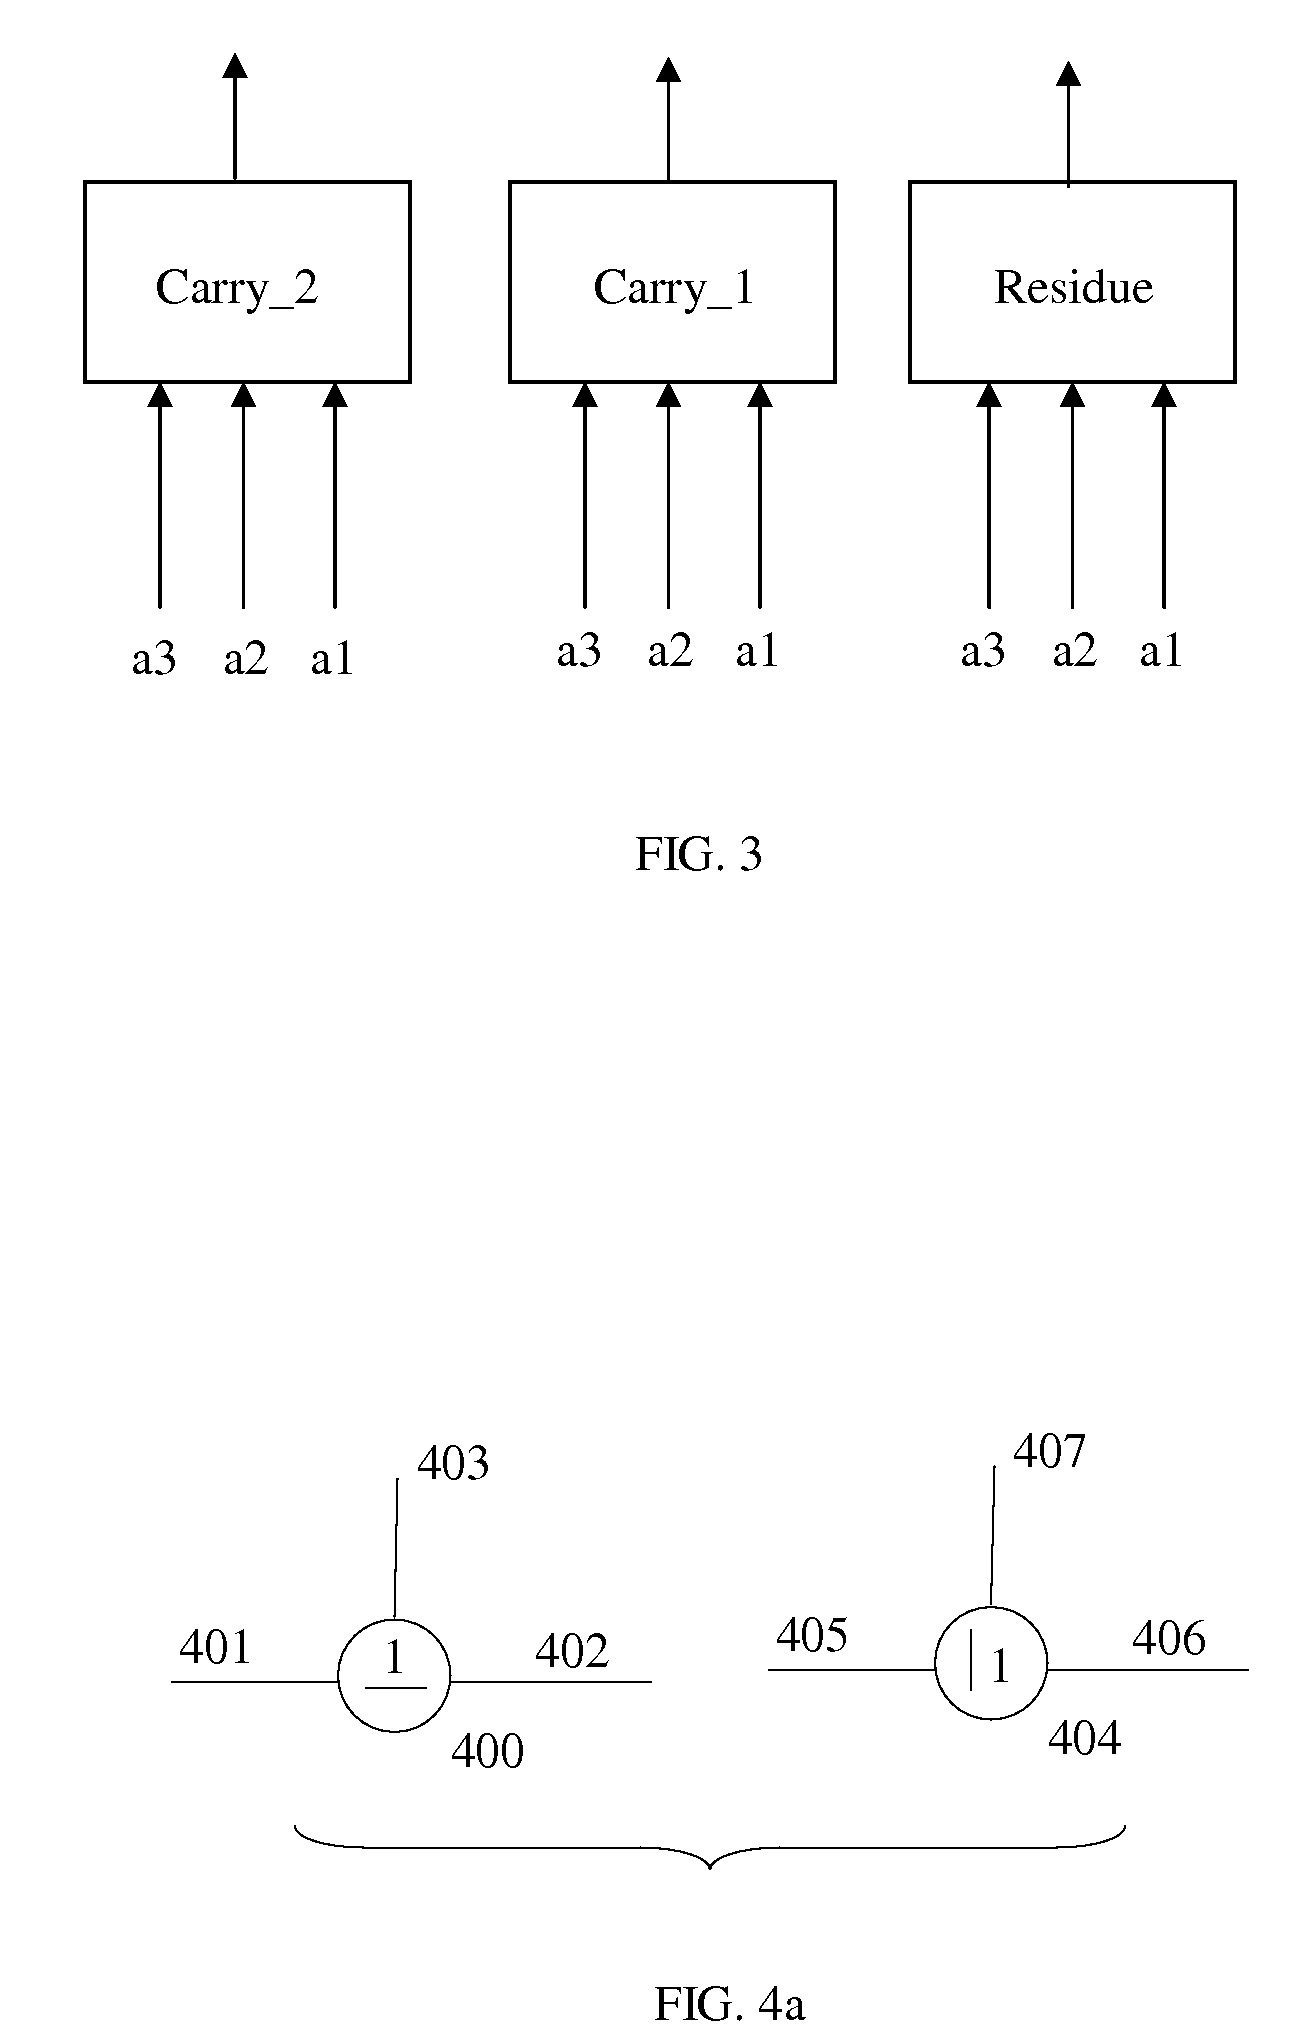 Multi-Input, Multi-State Switching Functions and Multiplications